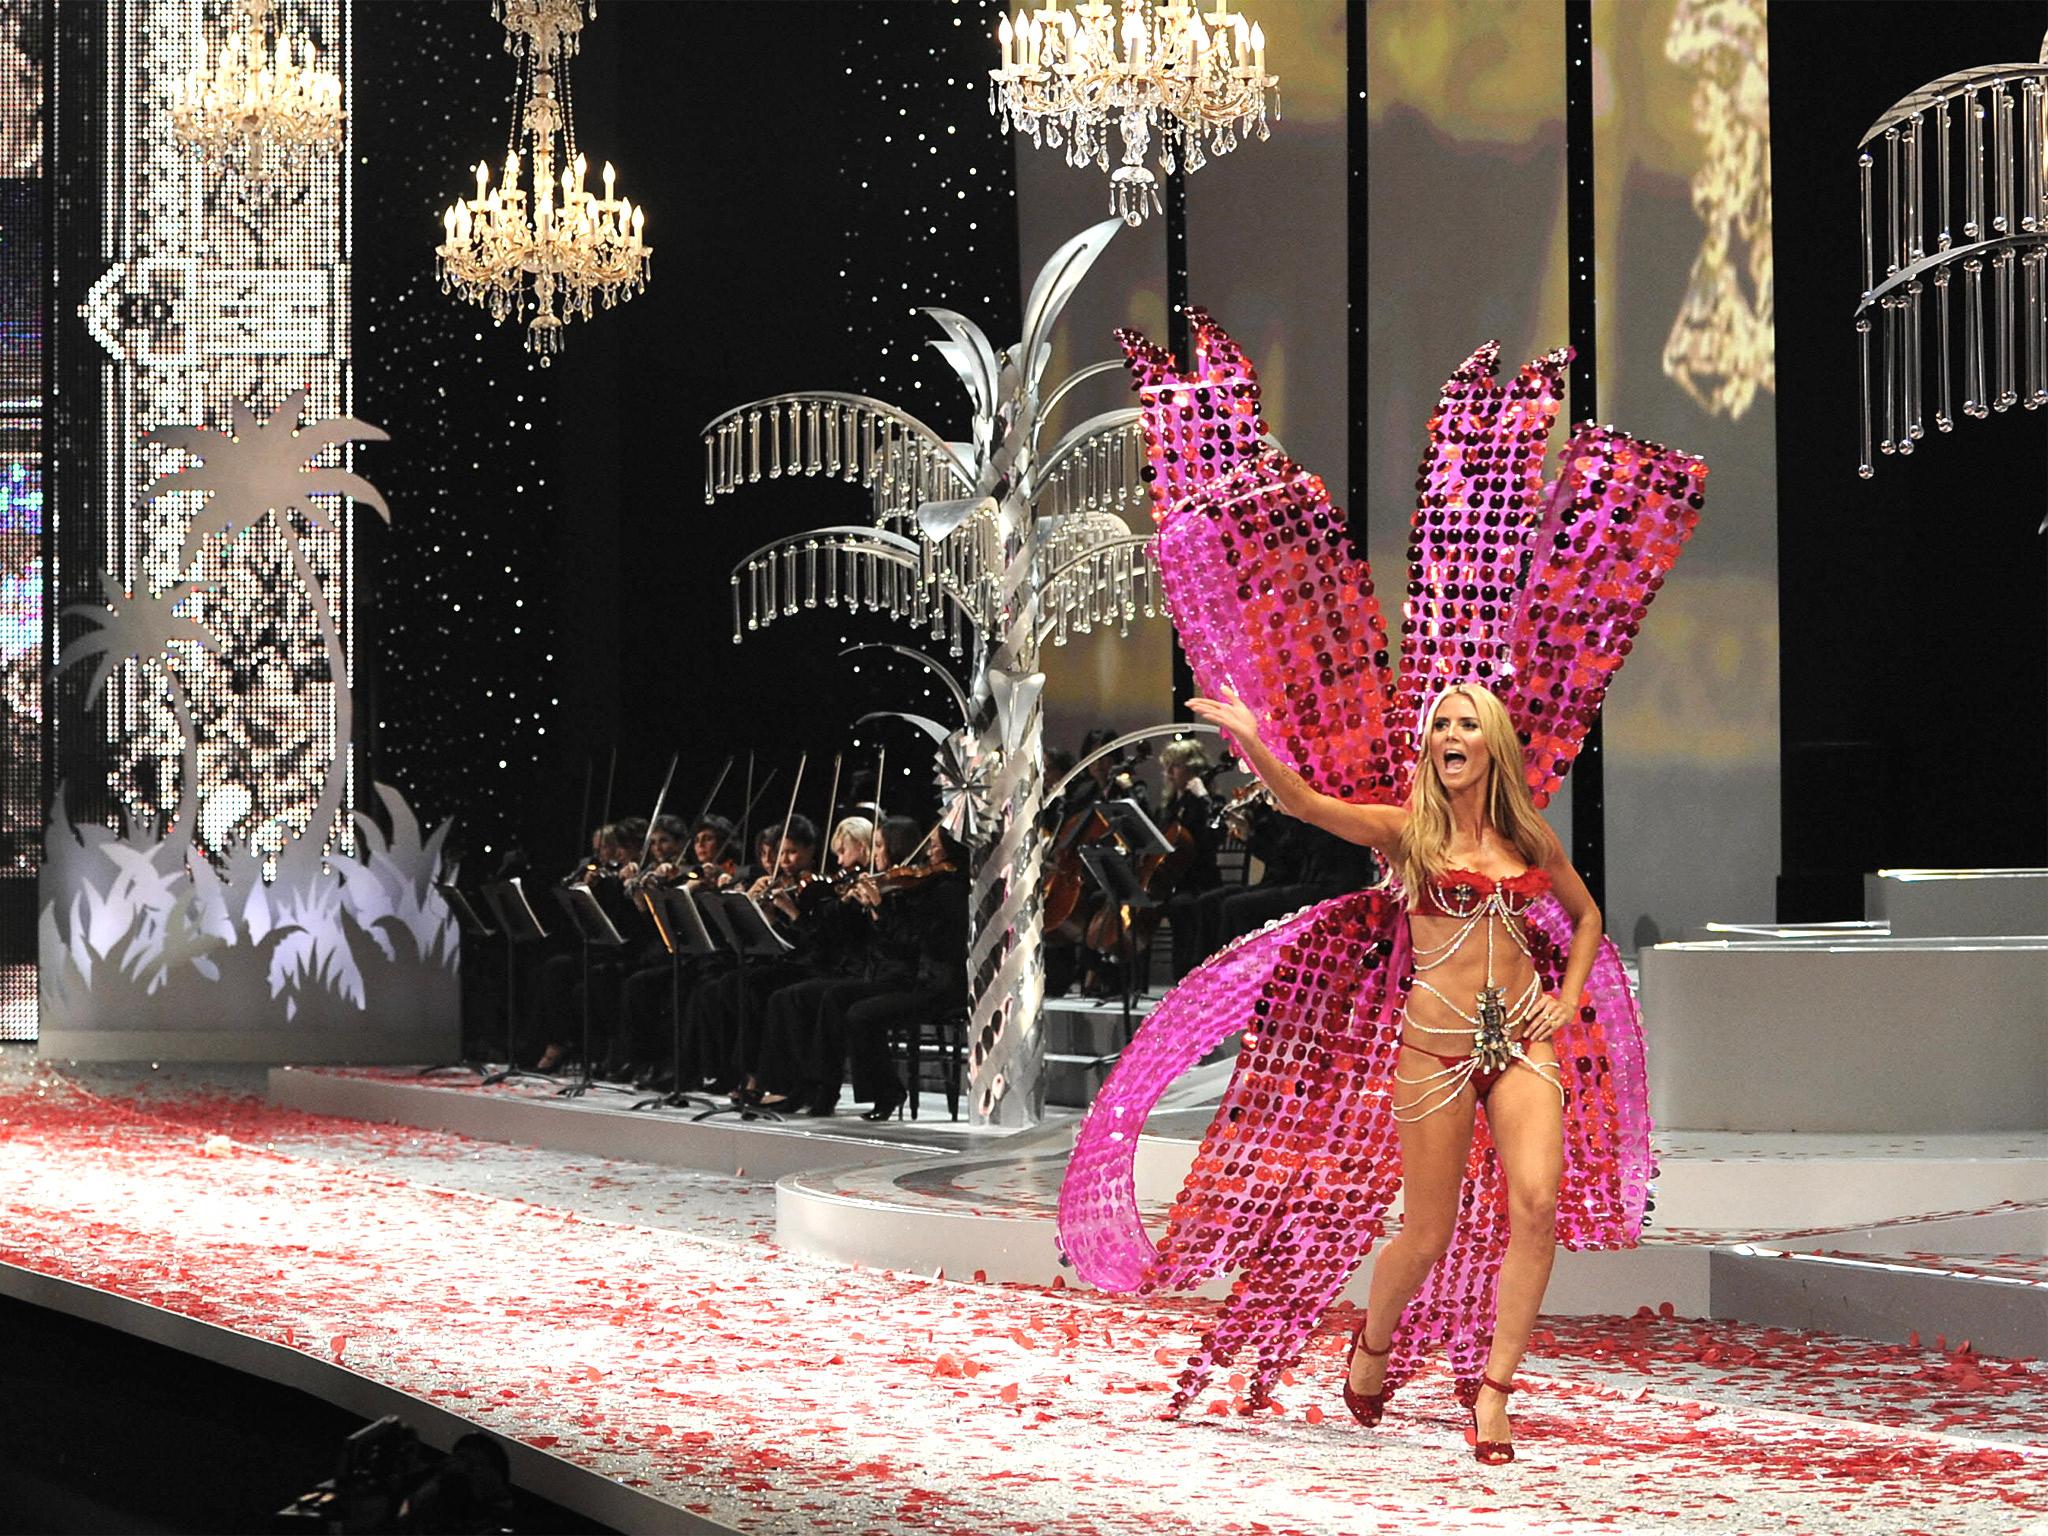 A brief history of Victoria's Secret: Can the iconic brand reinvent itself  and thrive again?